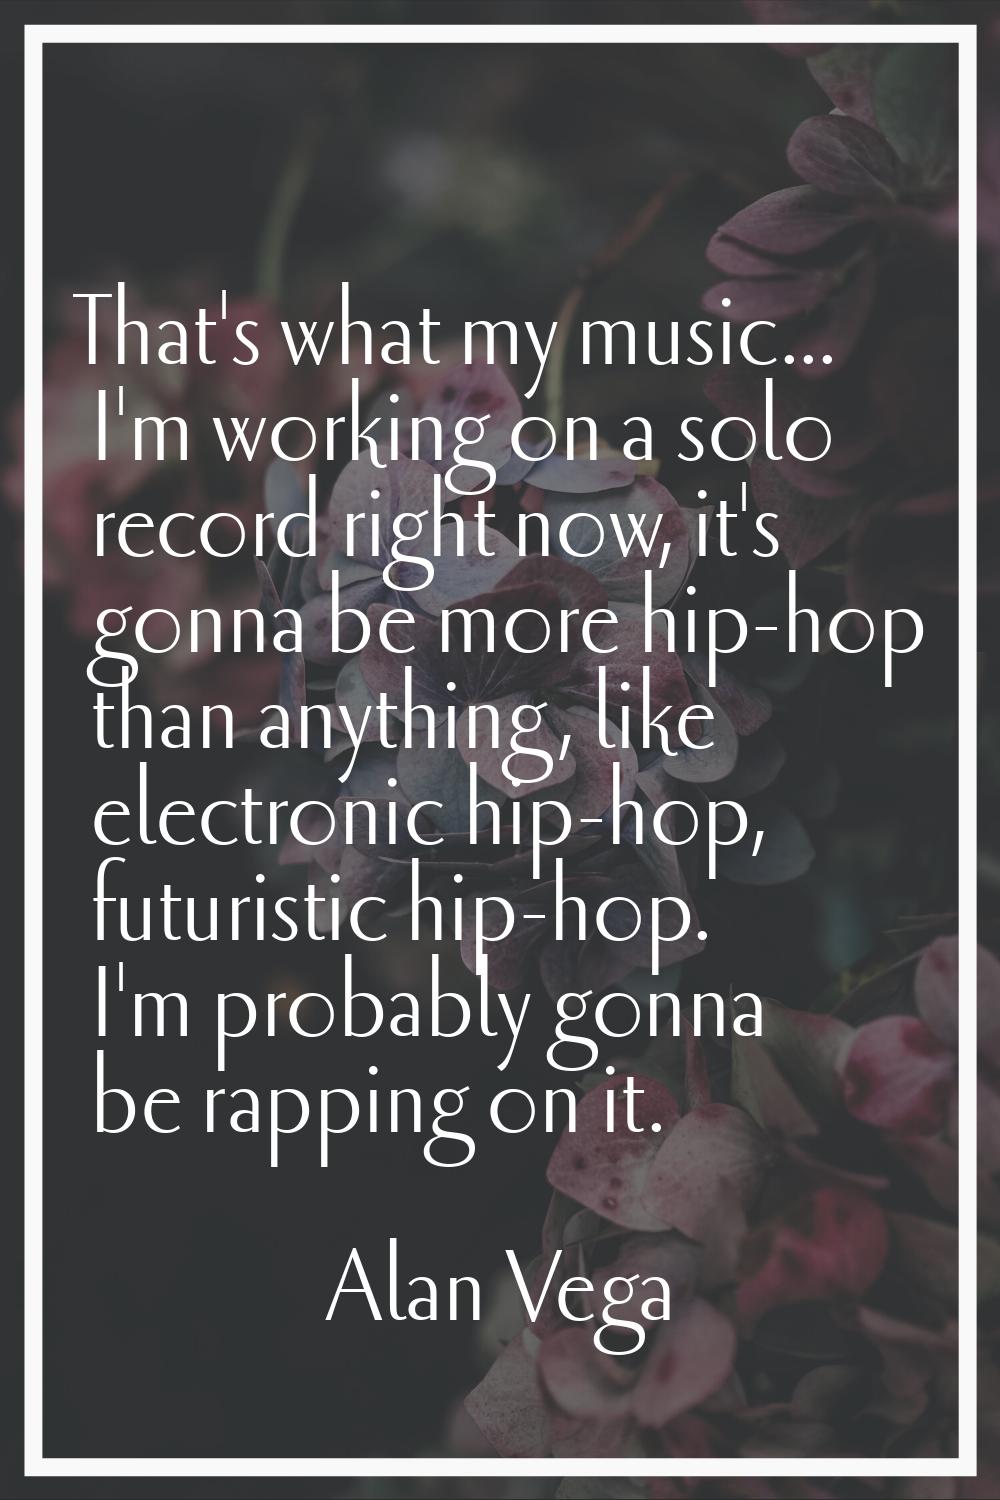 That's what my music... I'm working on a solo record right now, it's gonna be more hip-hop than any